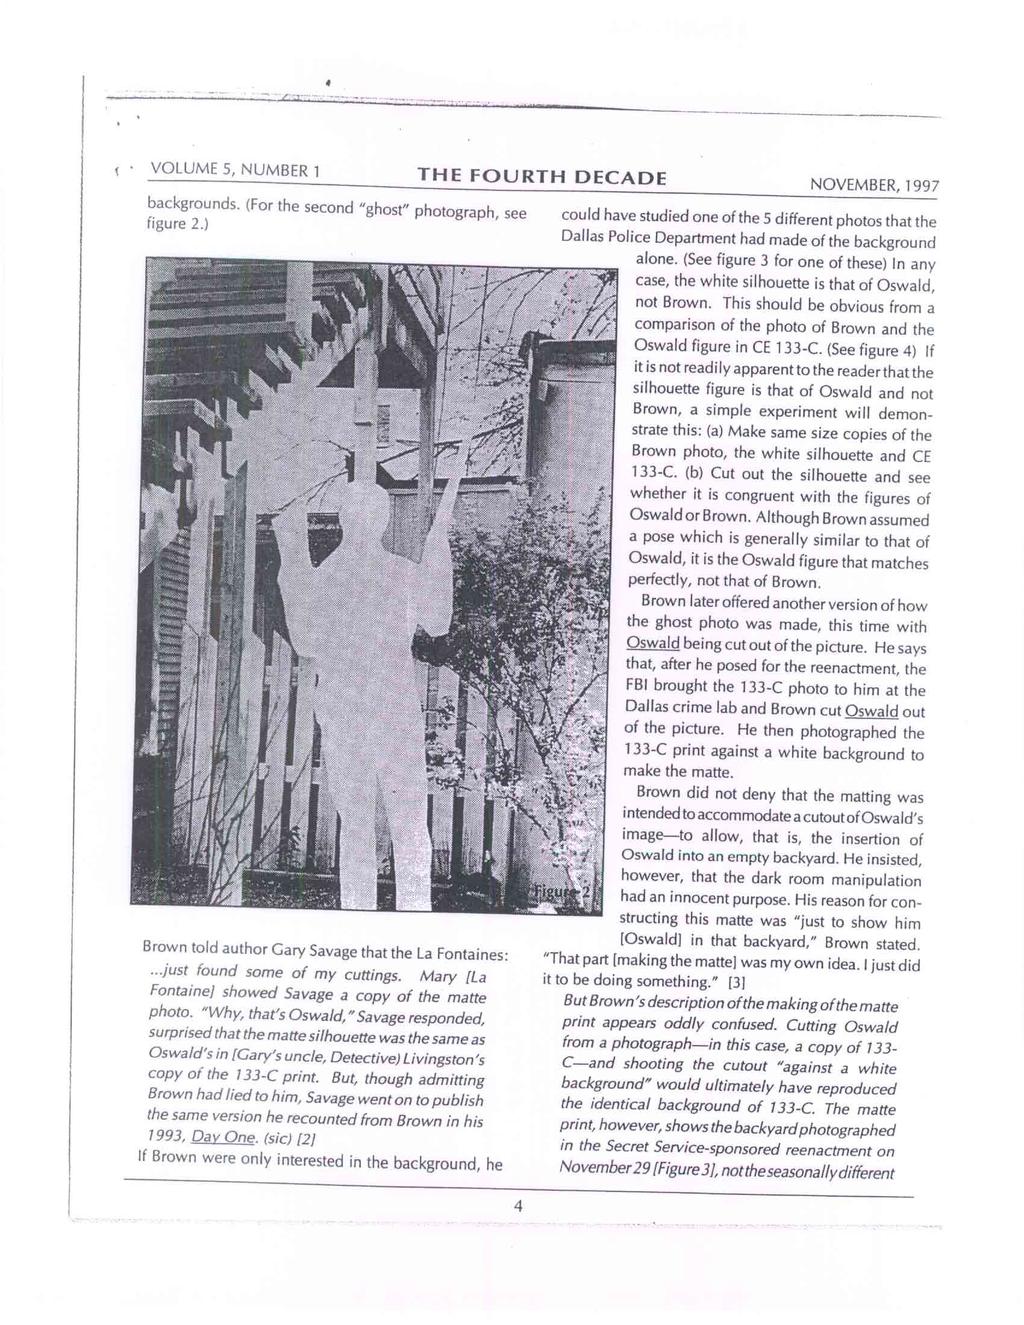 VOLUME 5, NUMBER 1 THE FOURTH DECADE NOVEMBER, 1997 backgrounds. (For the second "ghost" photograph, see figure 2.) Brown told author Gary Savage that the La Fontaines:...just found some of my cuttings.